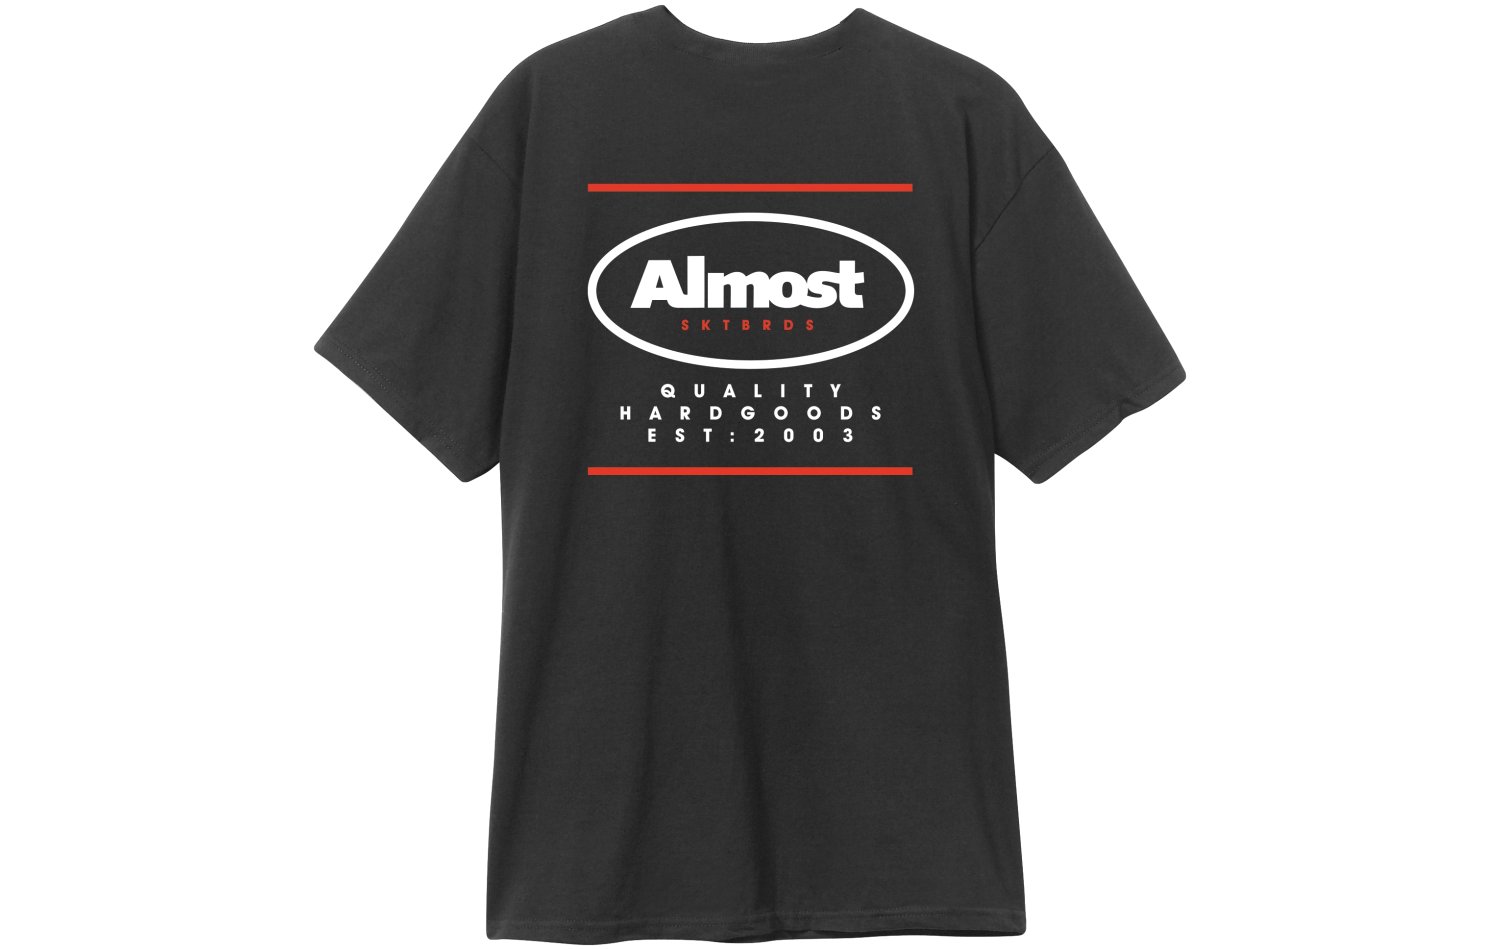 Almost Quality S/S (20023473-BLK)